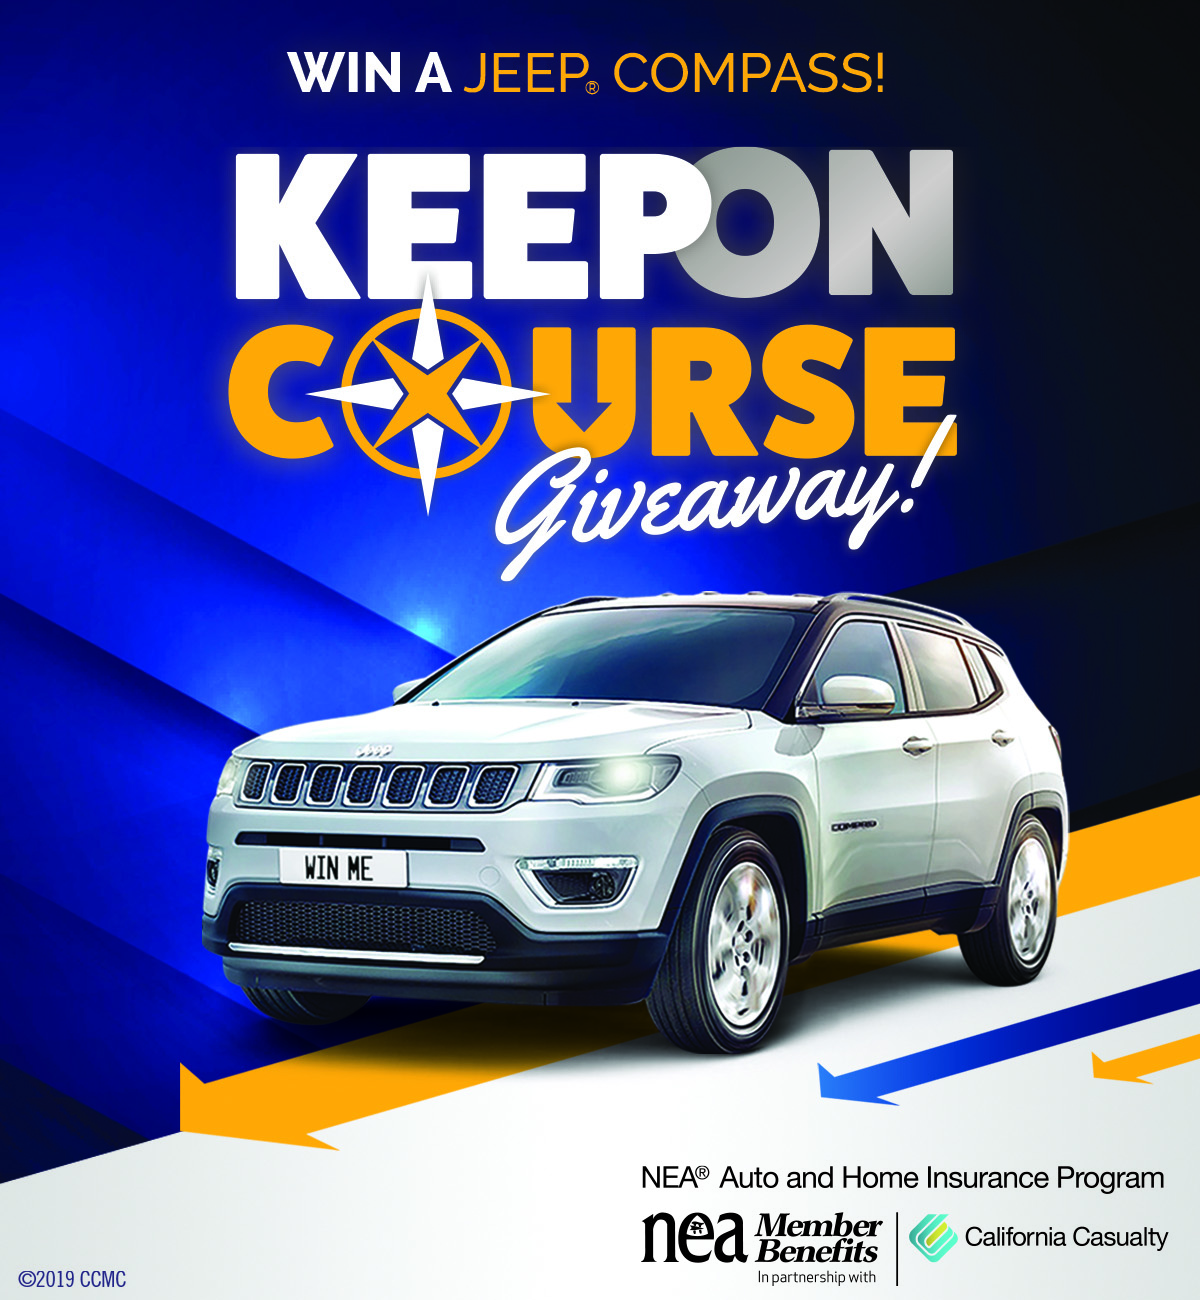 Enter to Win a Jeep Compass from California Casualty